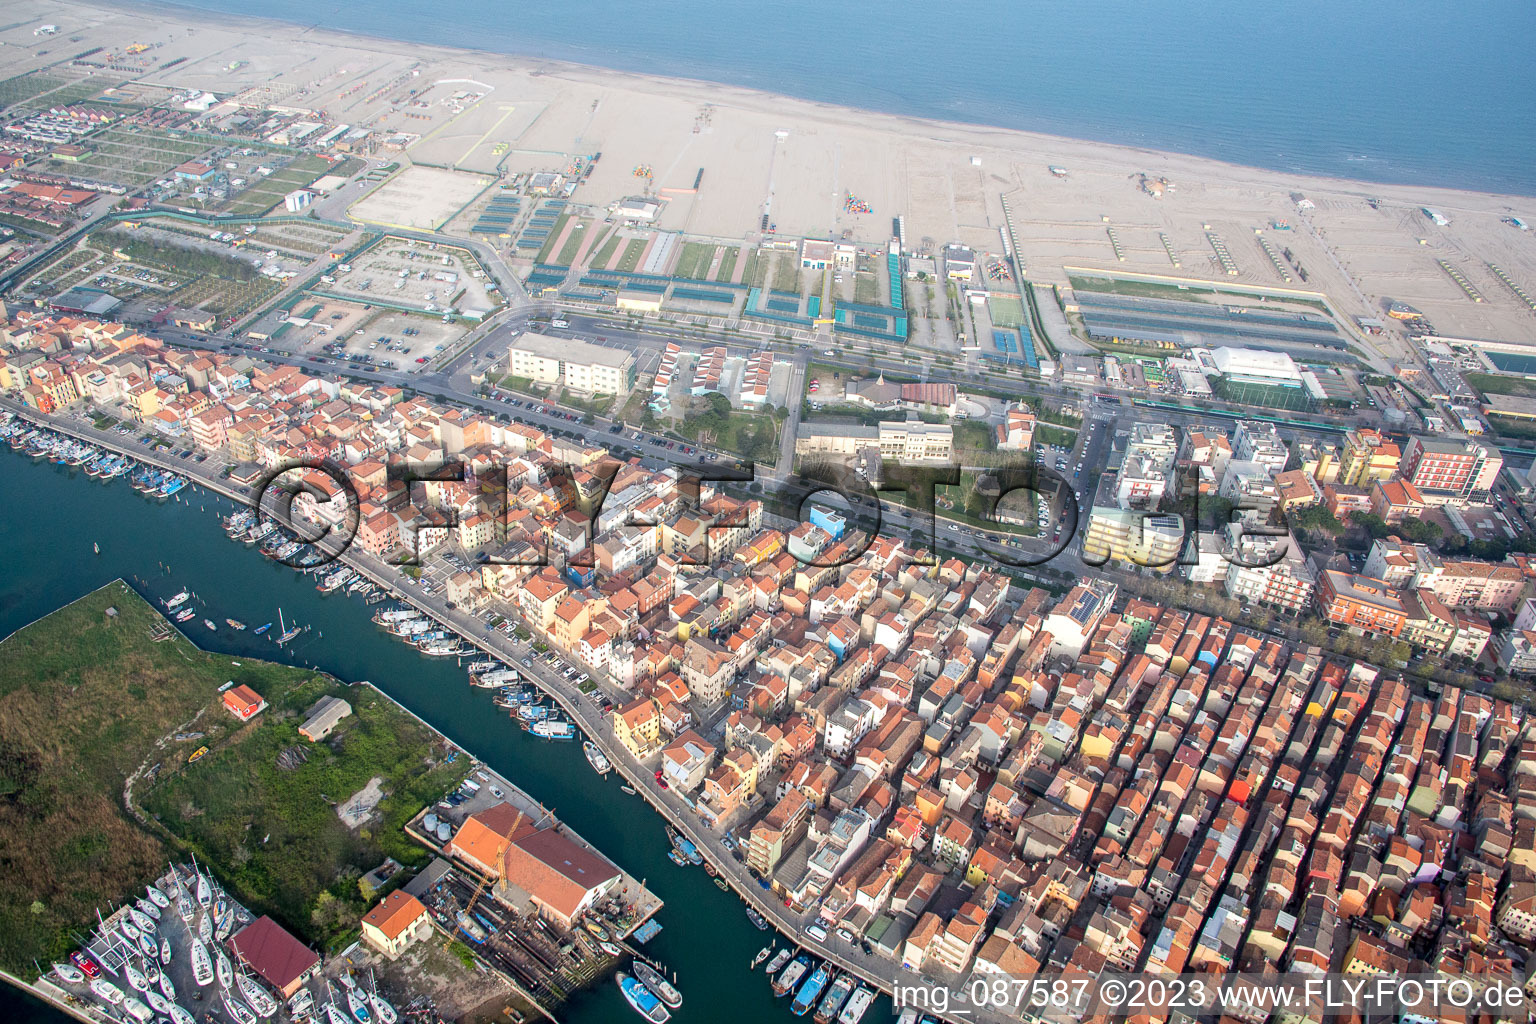 Drone image of Sottomarina in the state Veneto, Italy